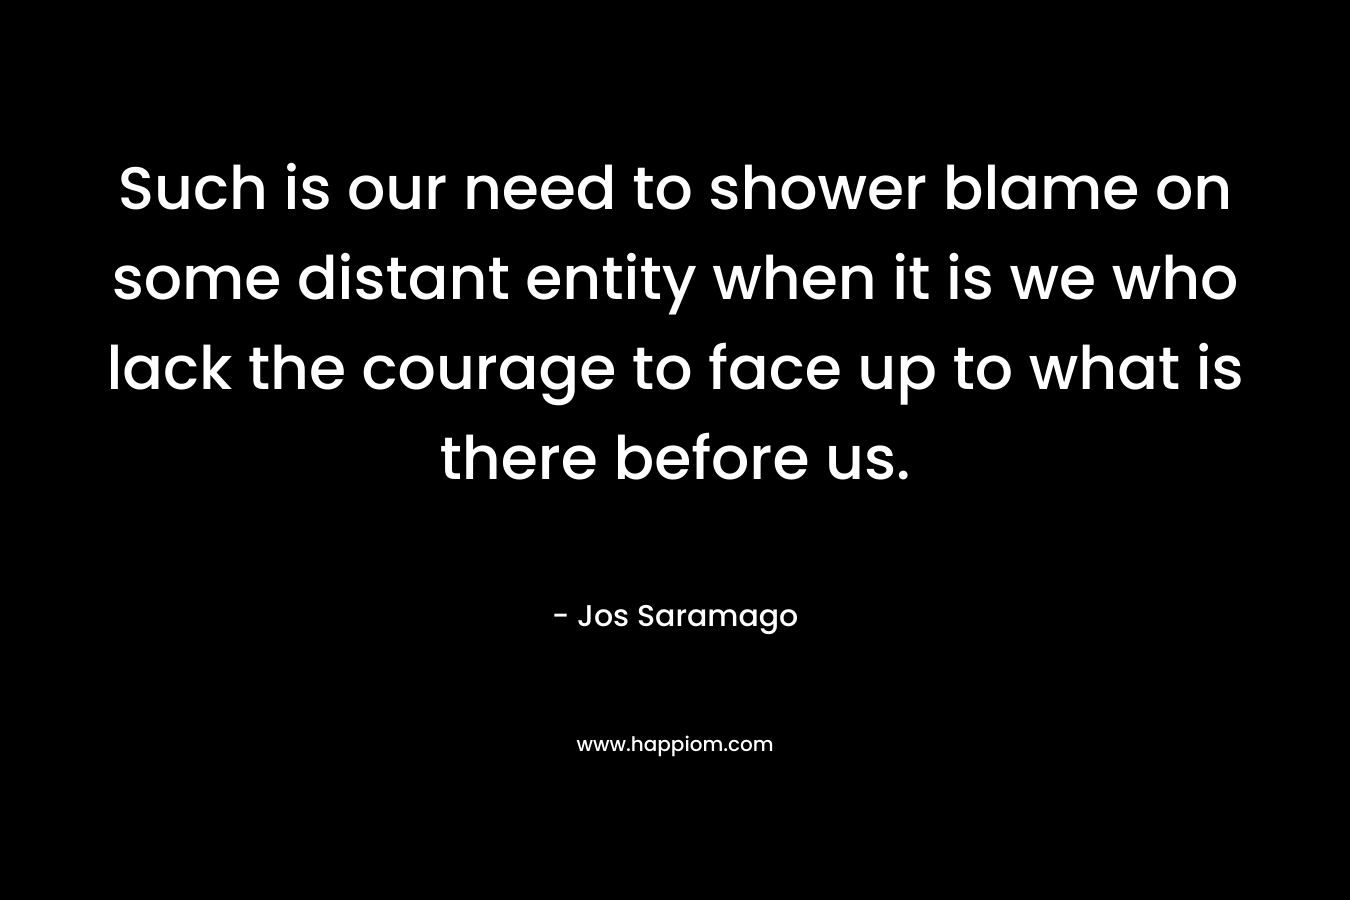 Such is our need to shower blame on some distant entity when it is we who lack the courage to face up to what is there before us. – Jos Saramago